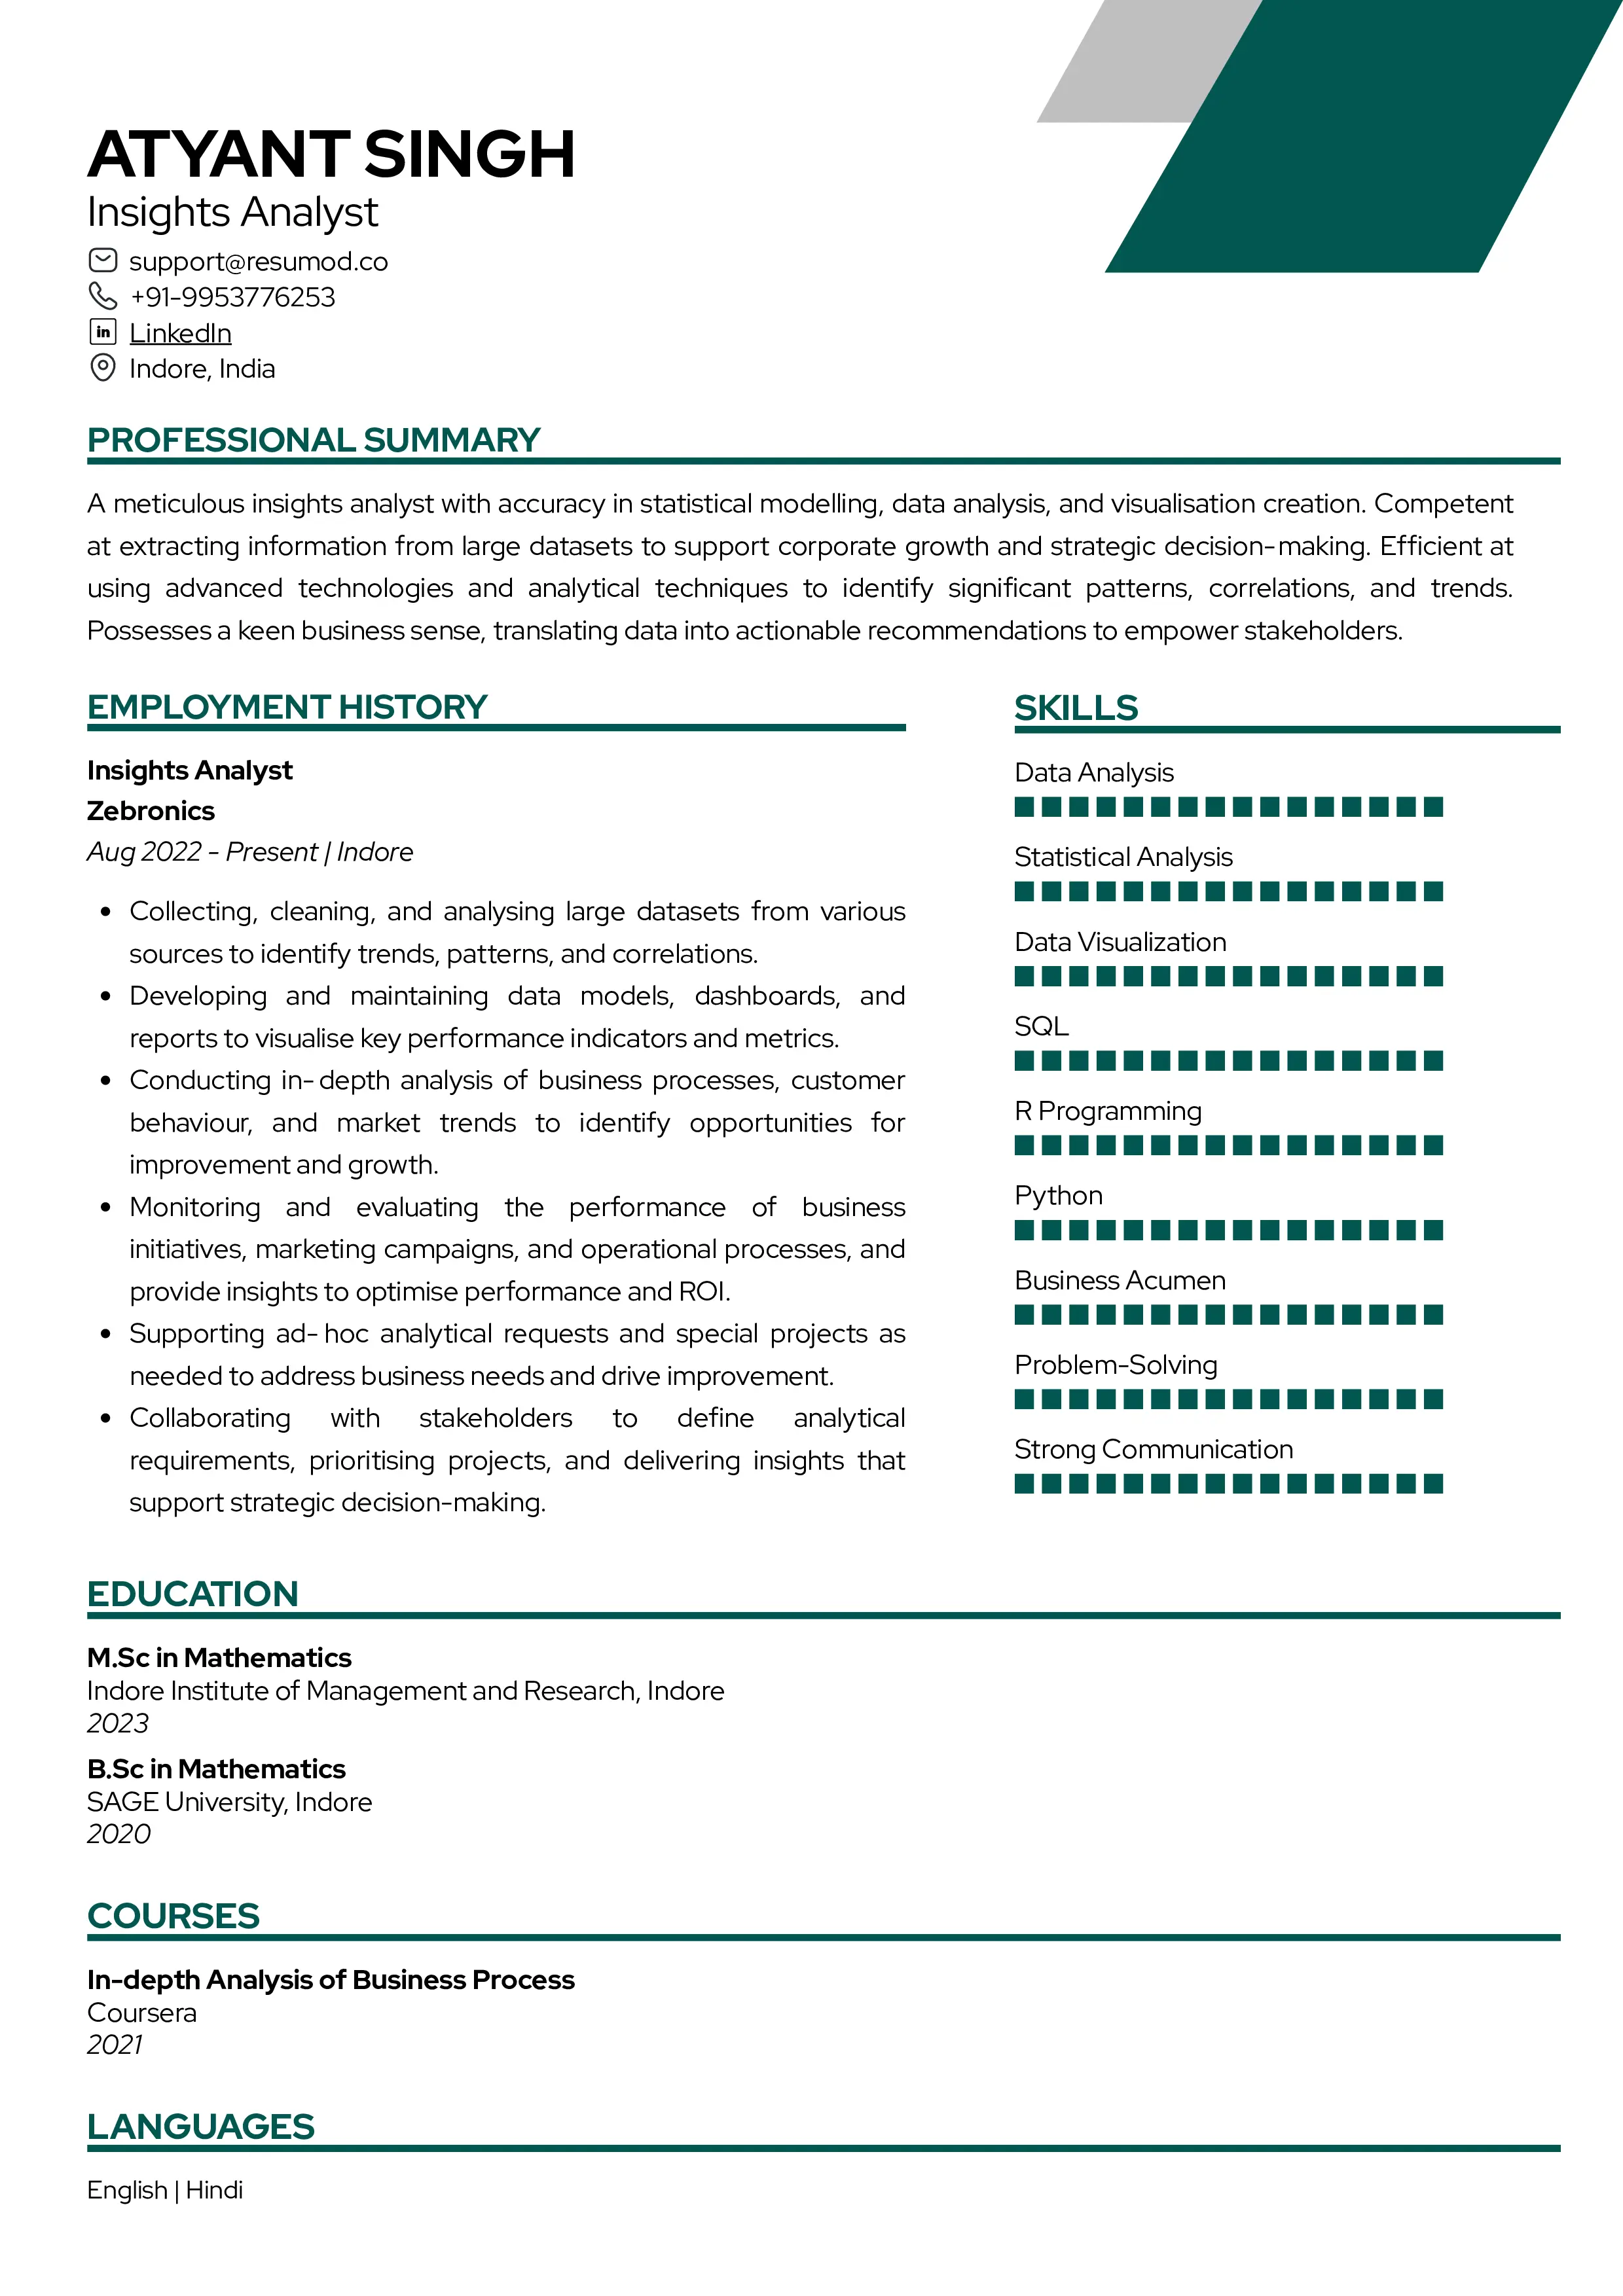 Sample Resume of Insights Analyst | Free Resume Templates & Samples on Resumod.co